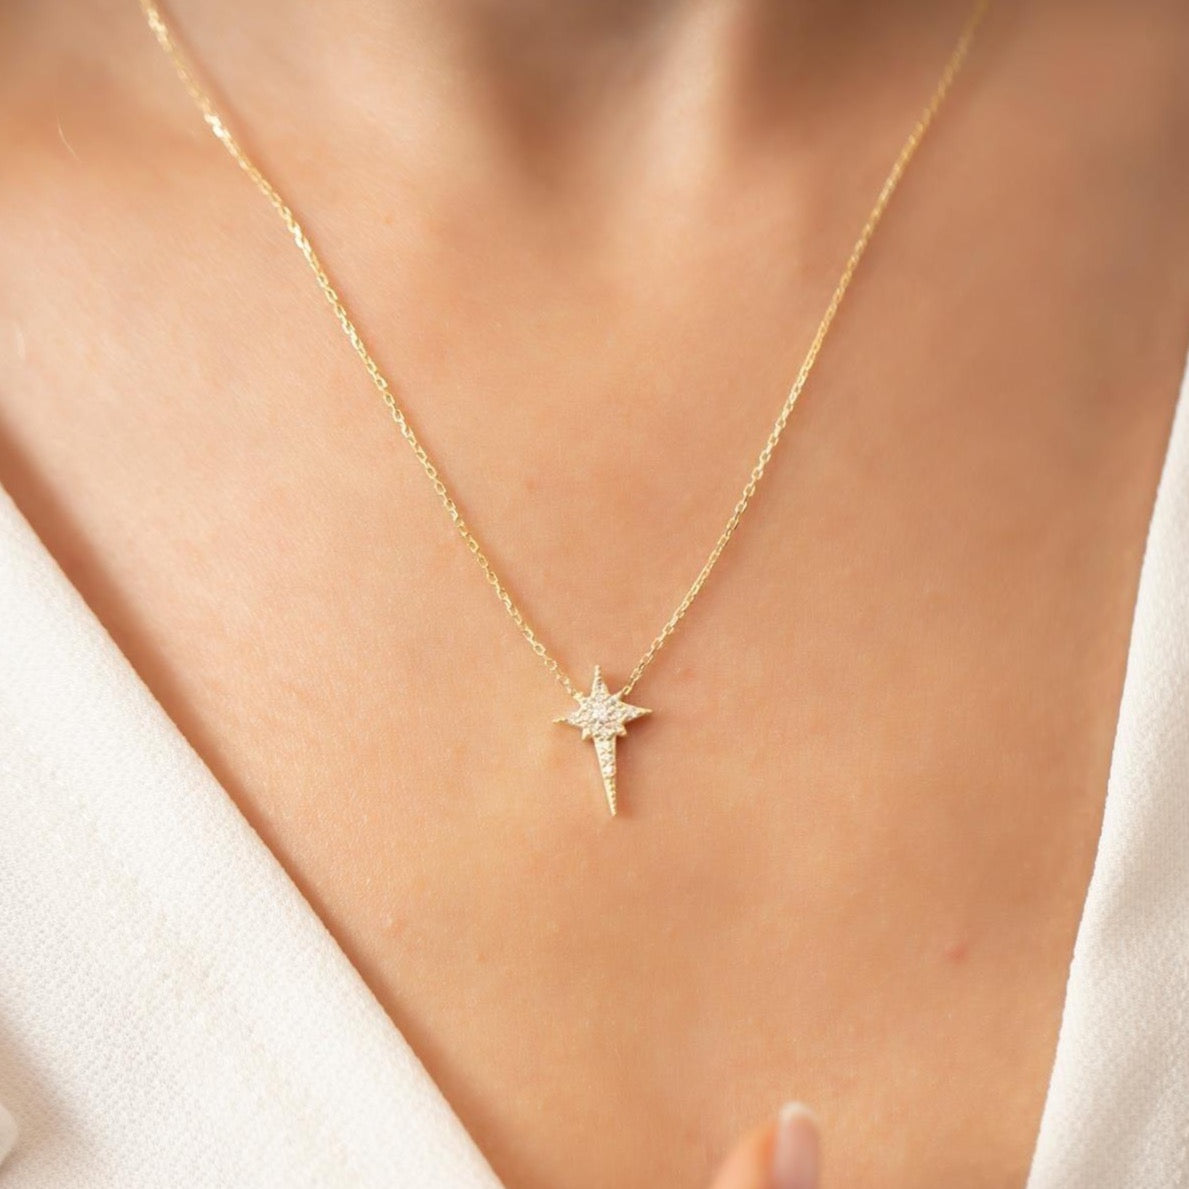 Northern Star Polaris Sterling Silver Necklace - Spero London